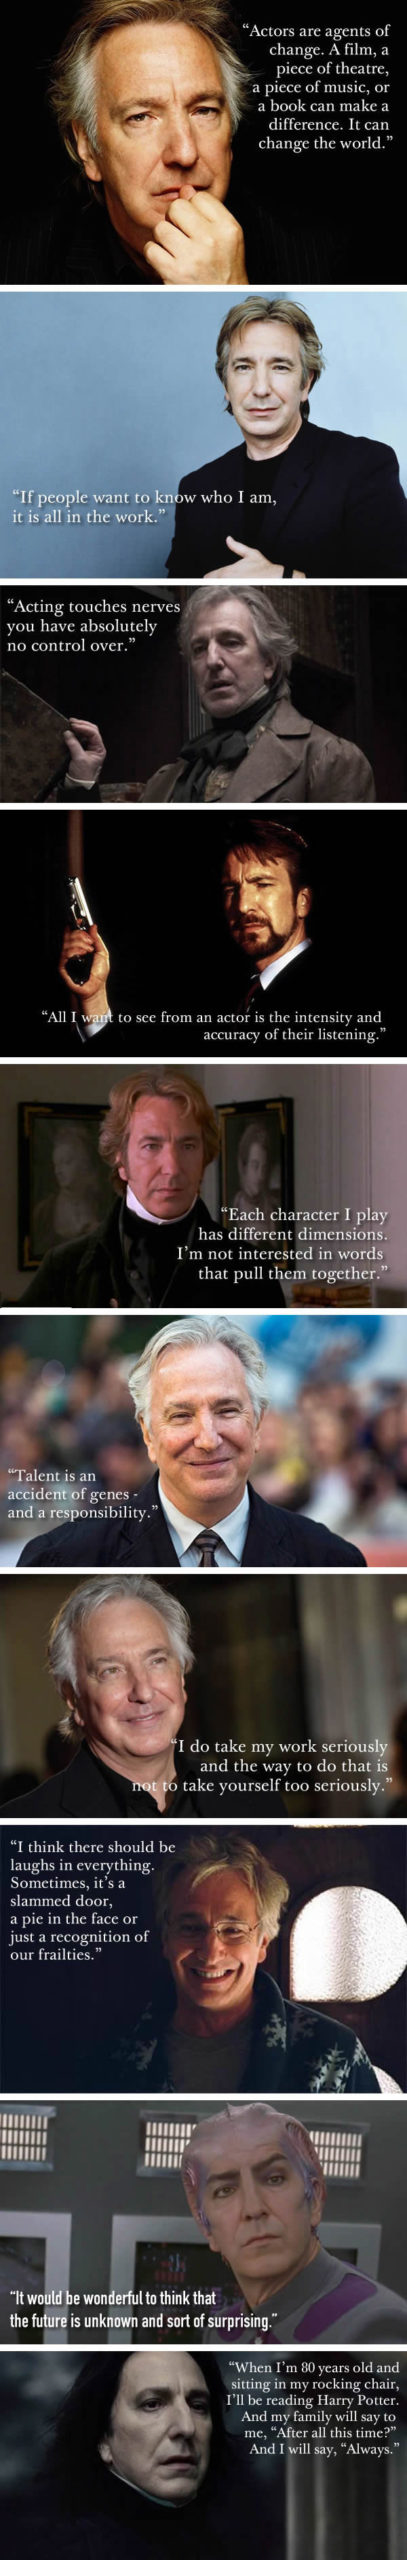 Alan+Rickman%26%238217%3Bs+Quotes+On+Life+And+Acting.